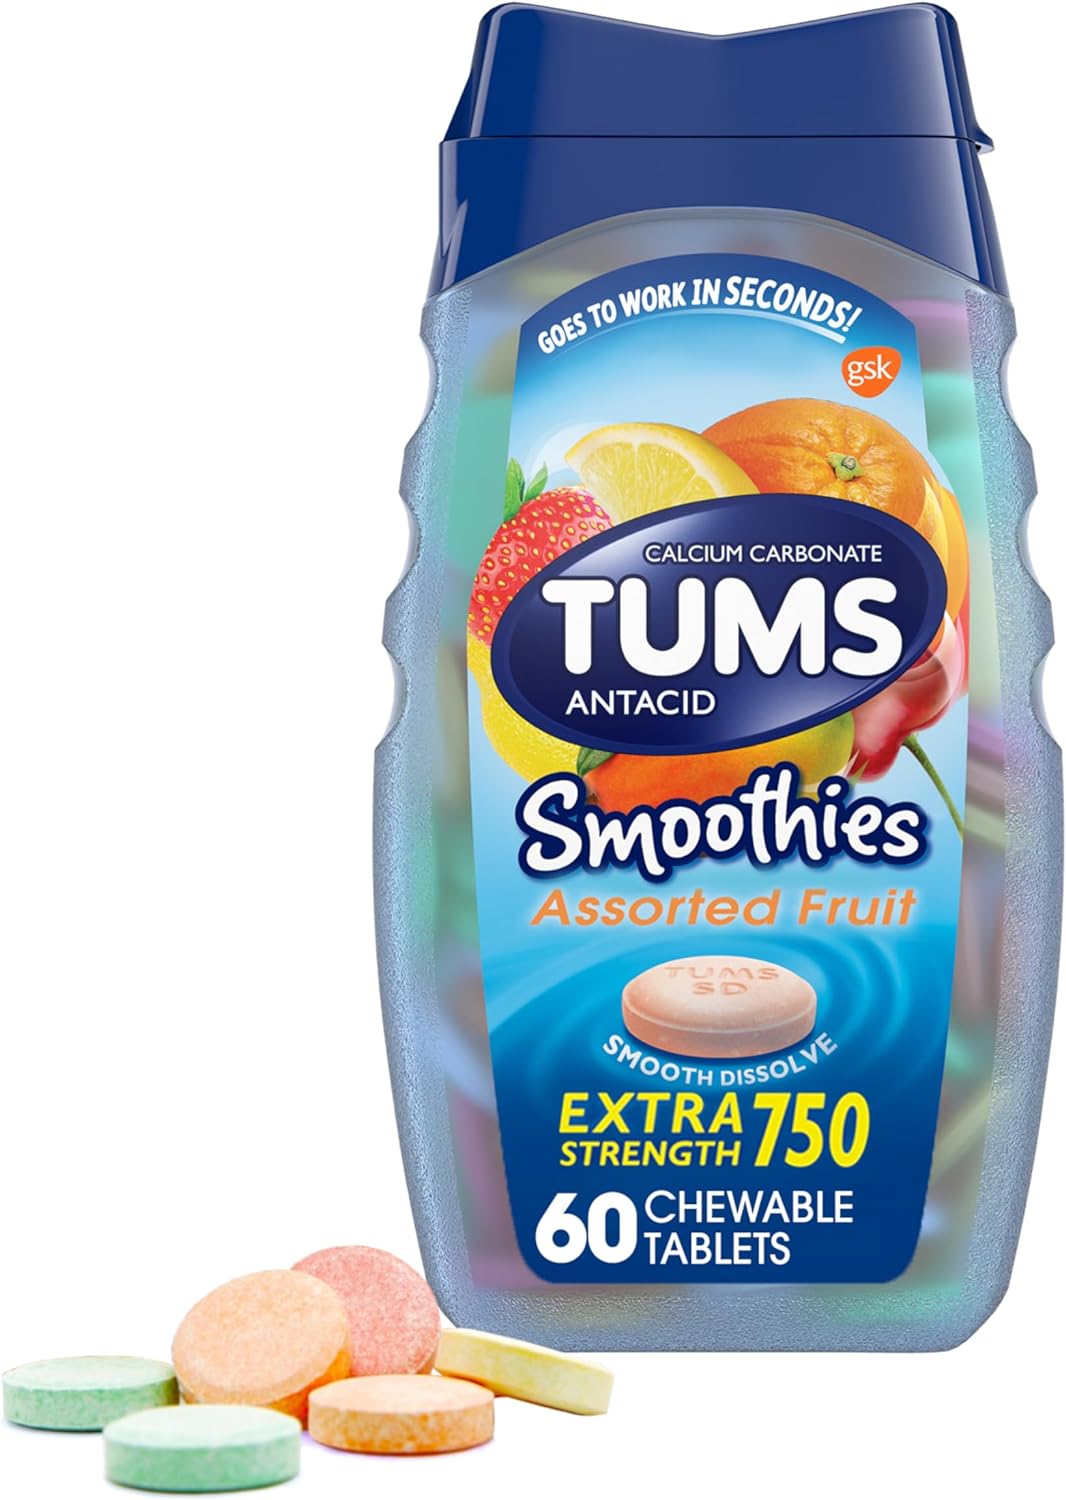 TUMS Smoothies Extra Strength Antacid Chewable Tablets for Heartburn Relief, Assorted Fruit - 60 Count (Pack of 1)